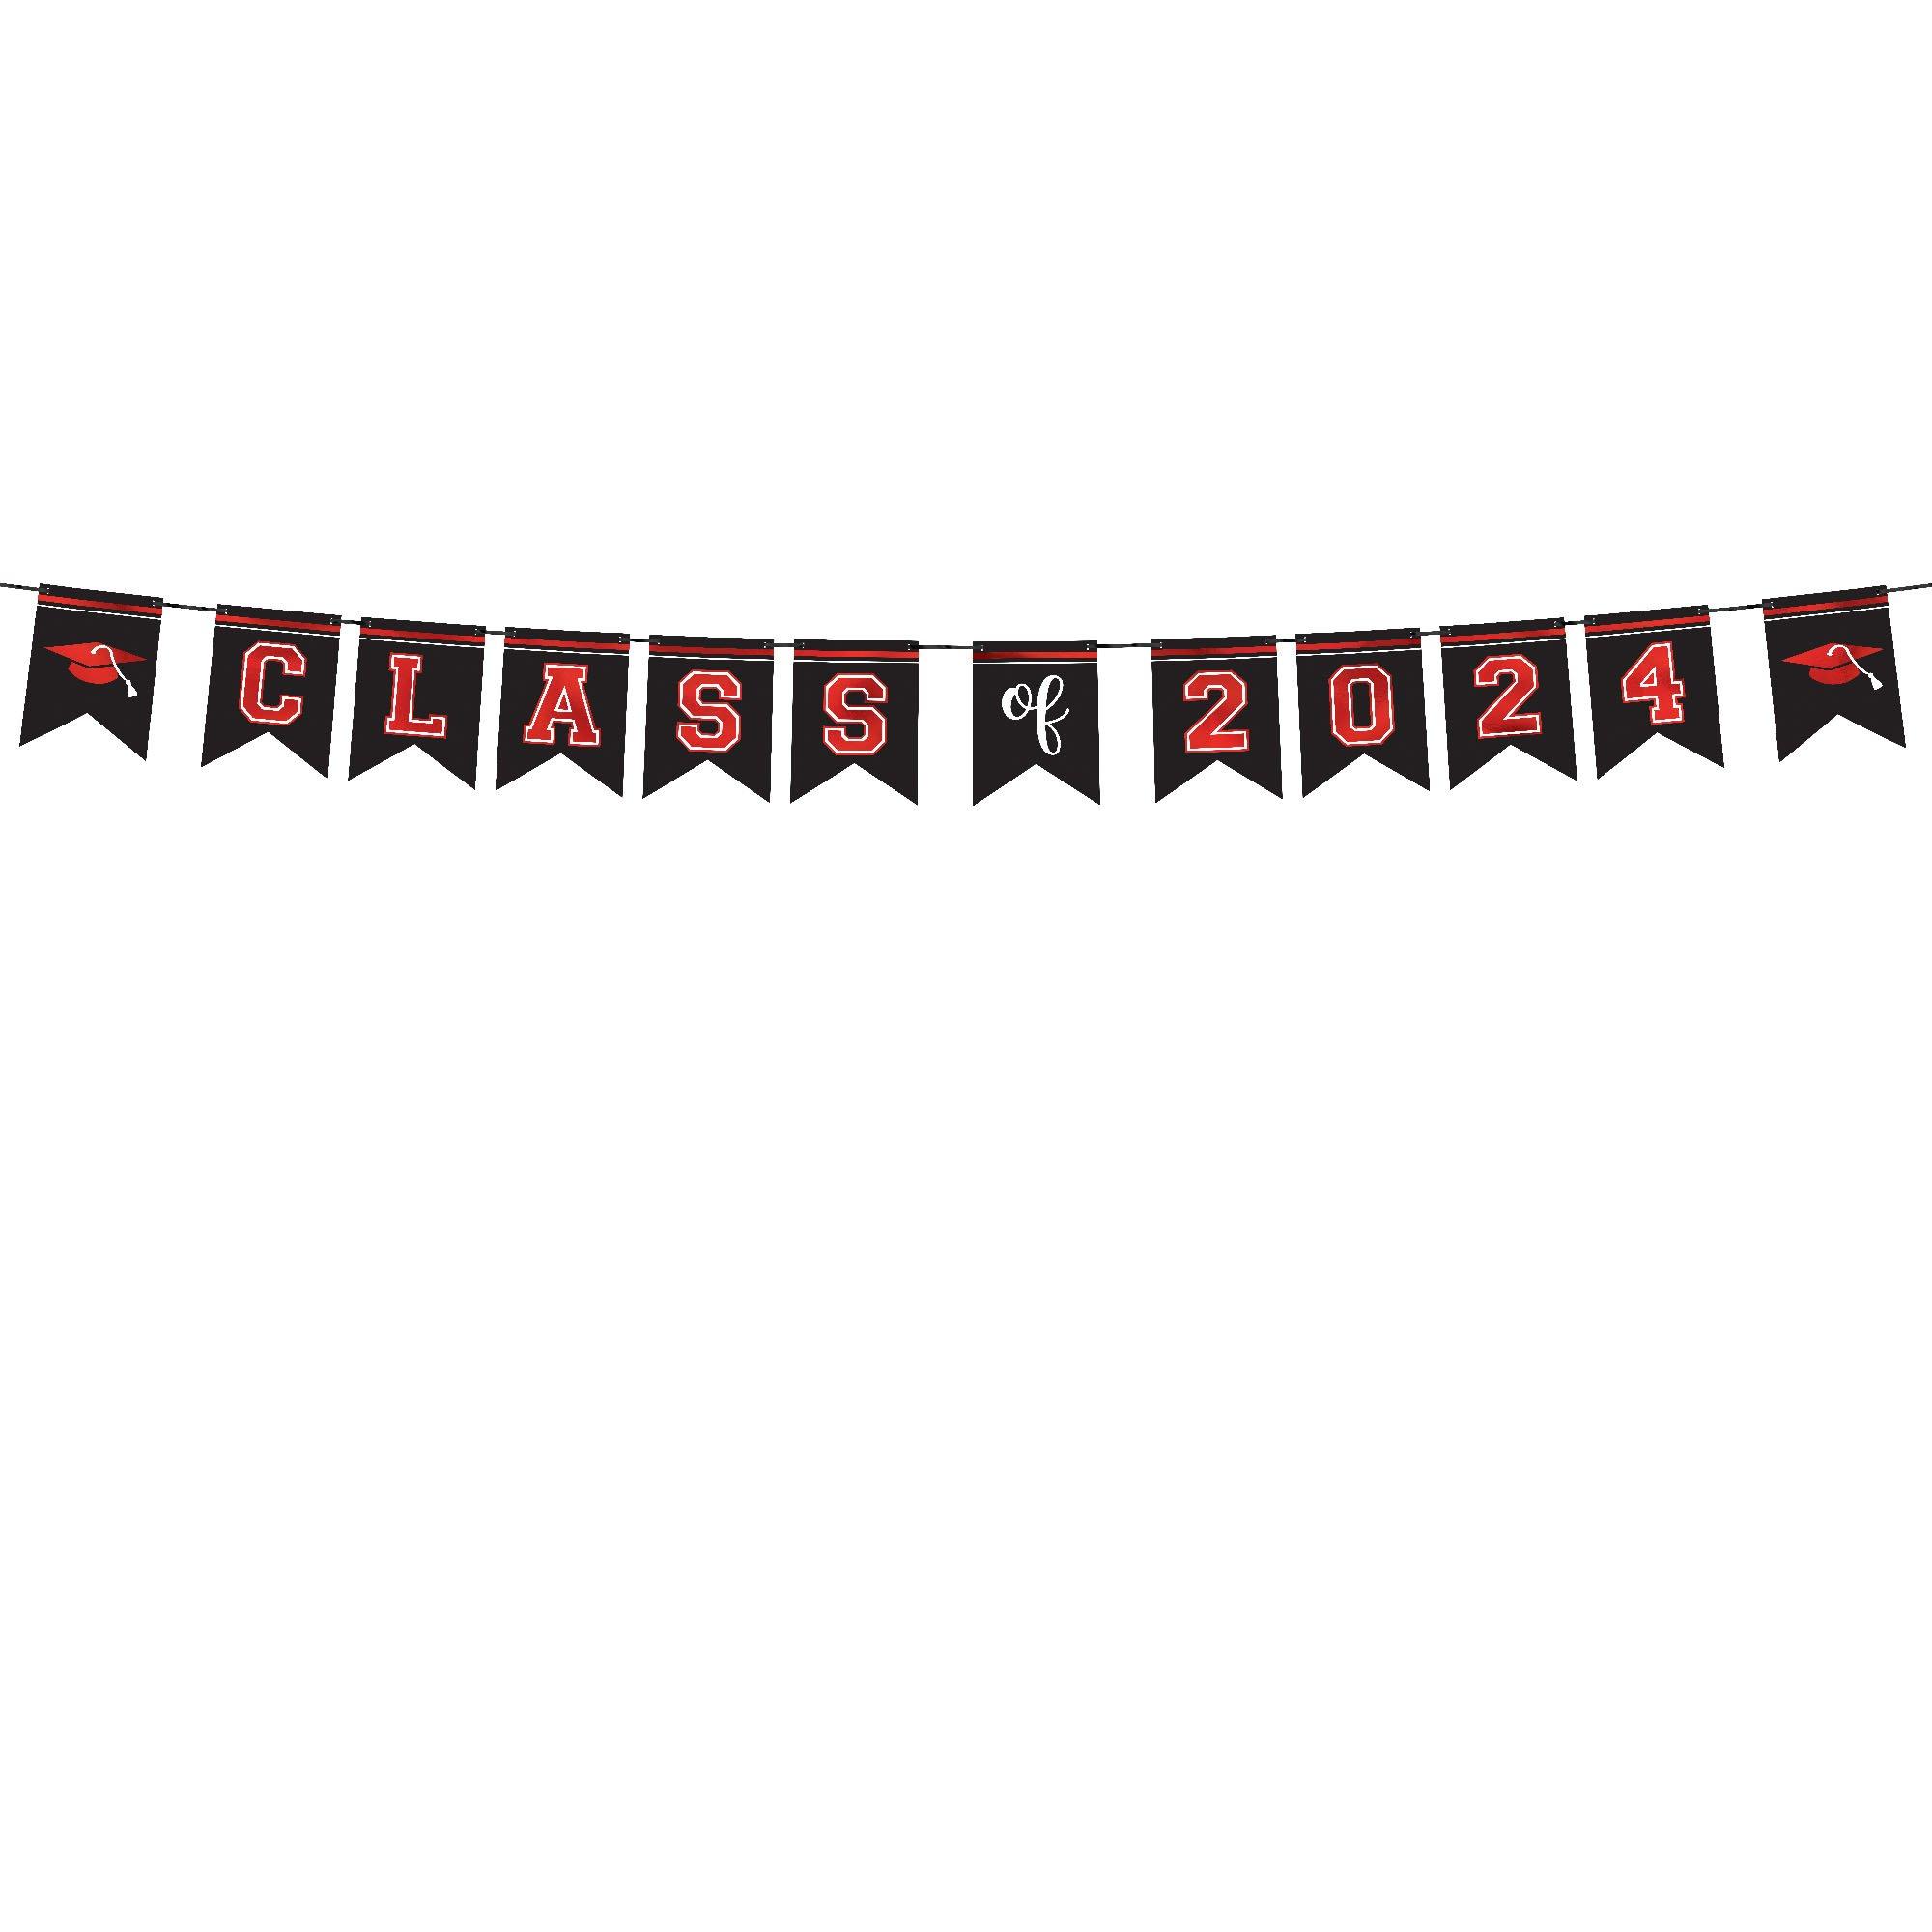 Class of 2024 Cardstock Pennant Banner, 12ft